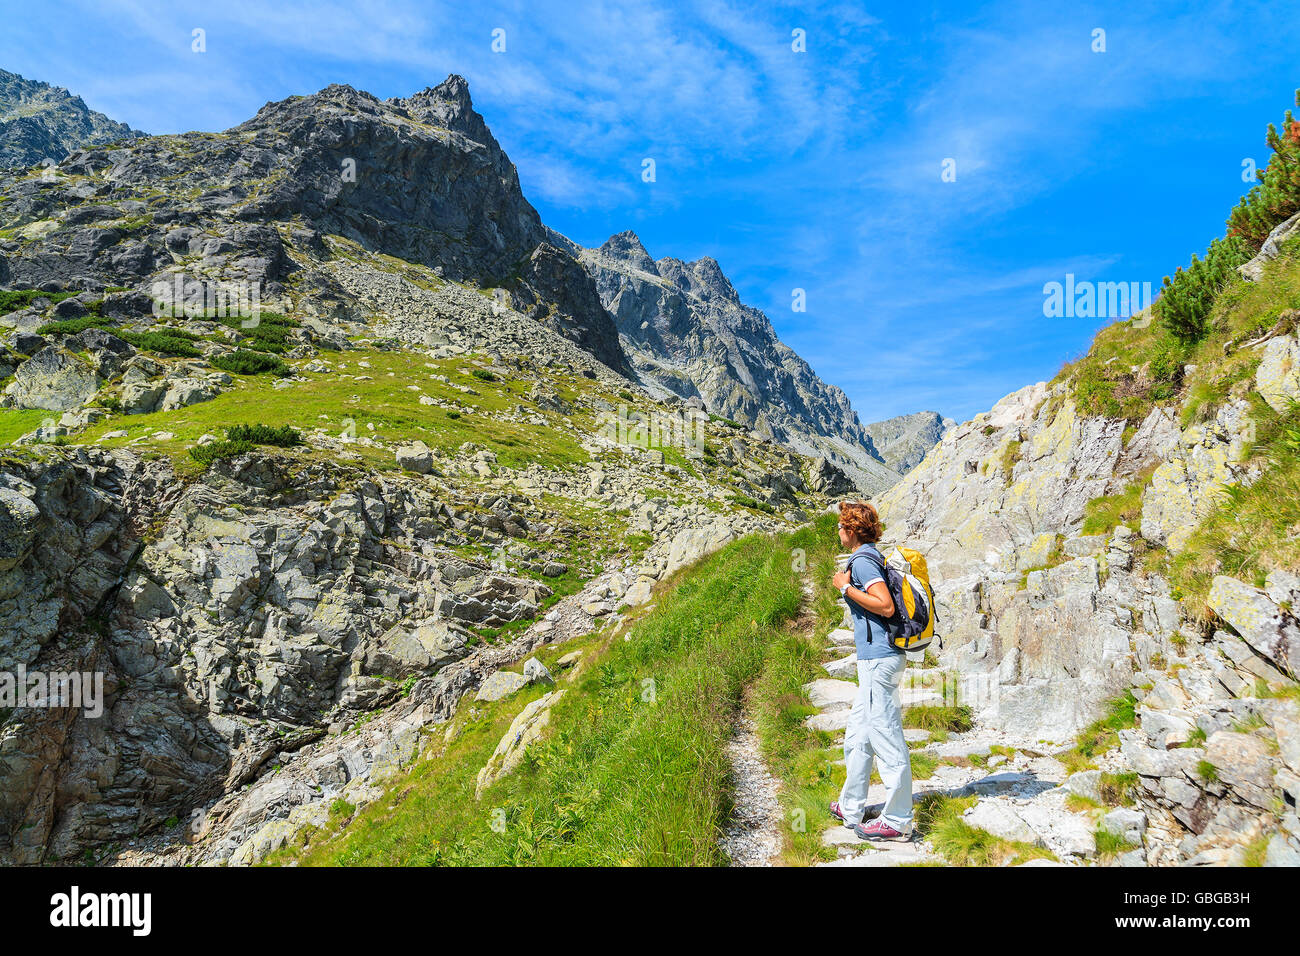 Young woman backpacker standing on hiking trail in summer landscape of High Tatra Mountains, Slovakia Stock Photo